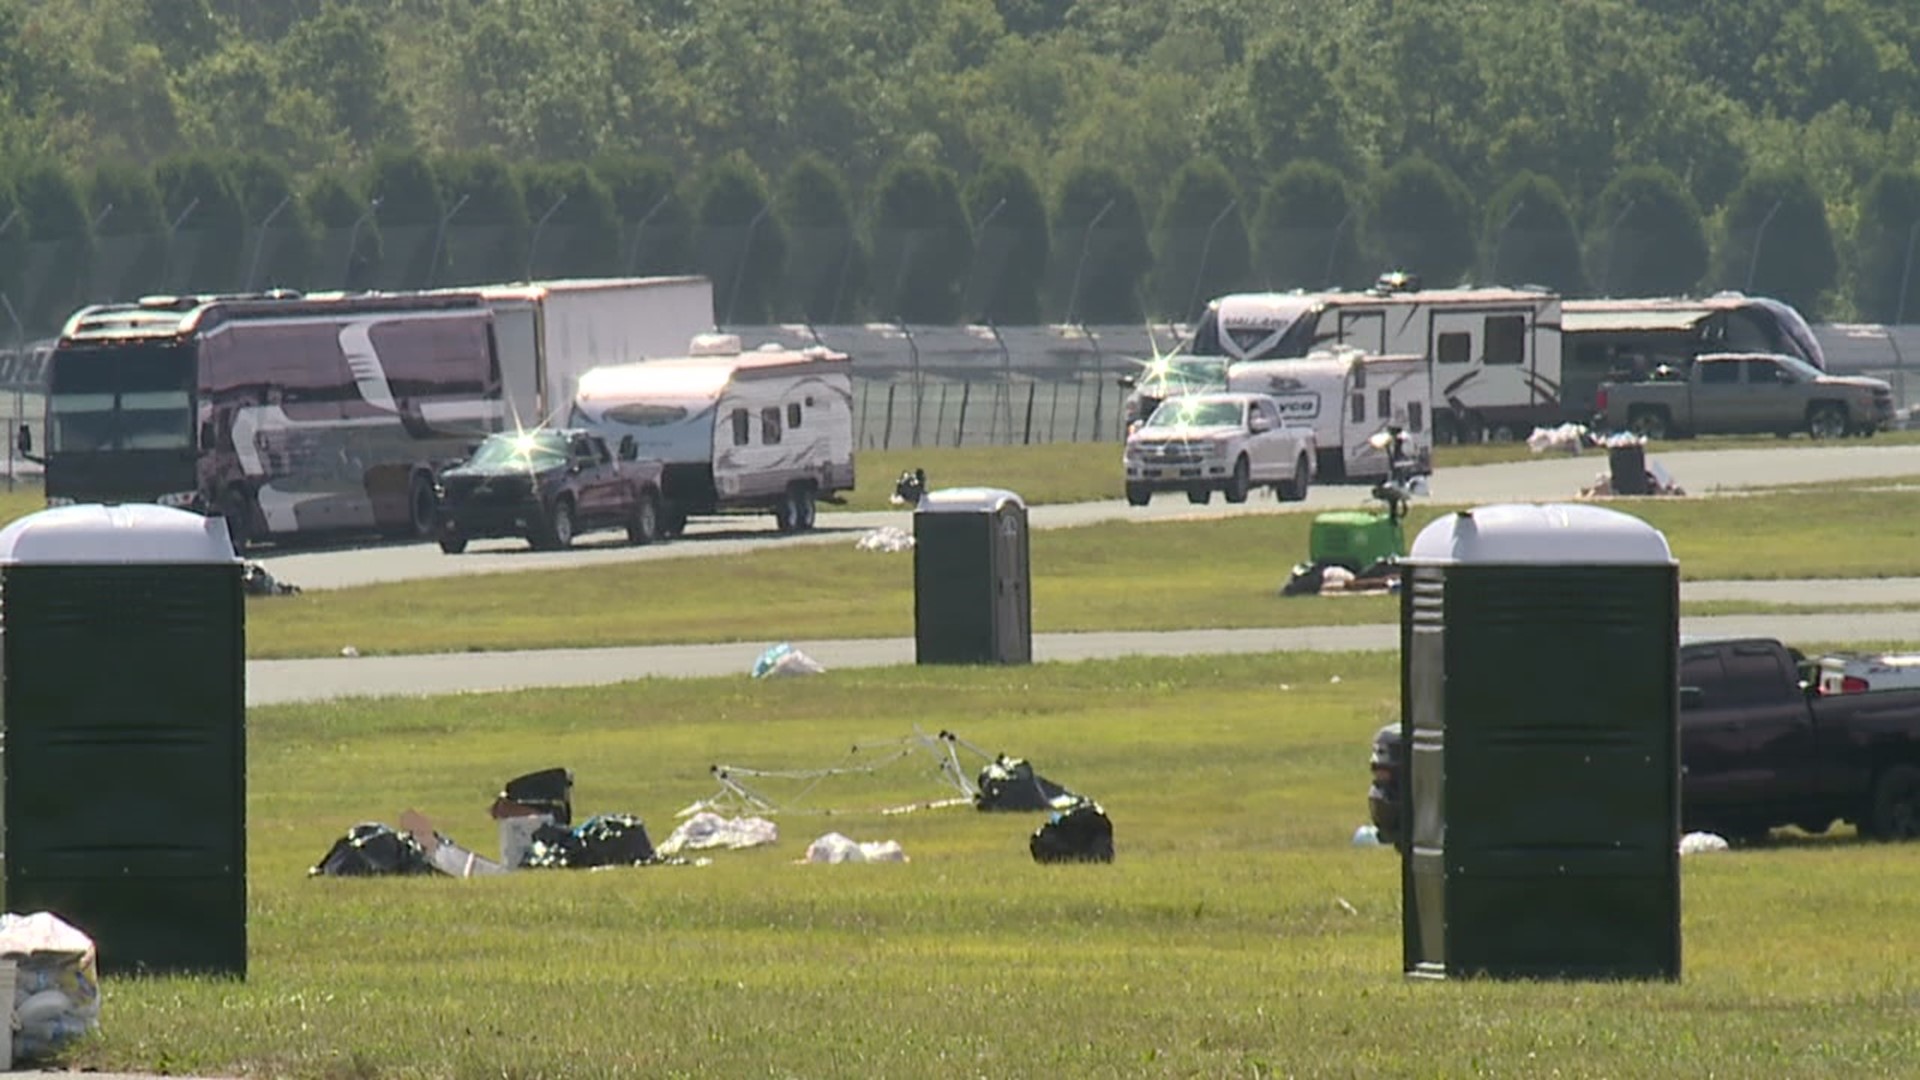 It was cleanup day at Pocono Raceway after the first in-person doubleheader NASCAR race drew hundreds of thousands of fans to the track in Long Pond.